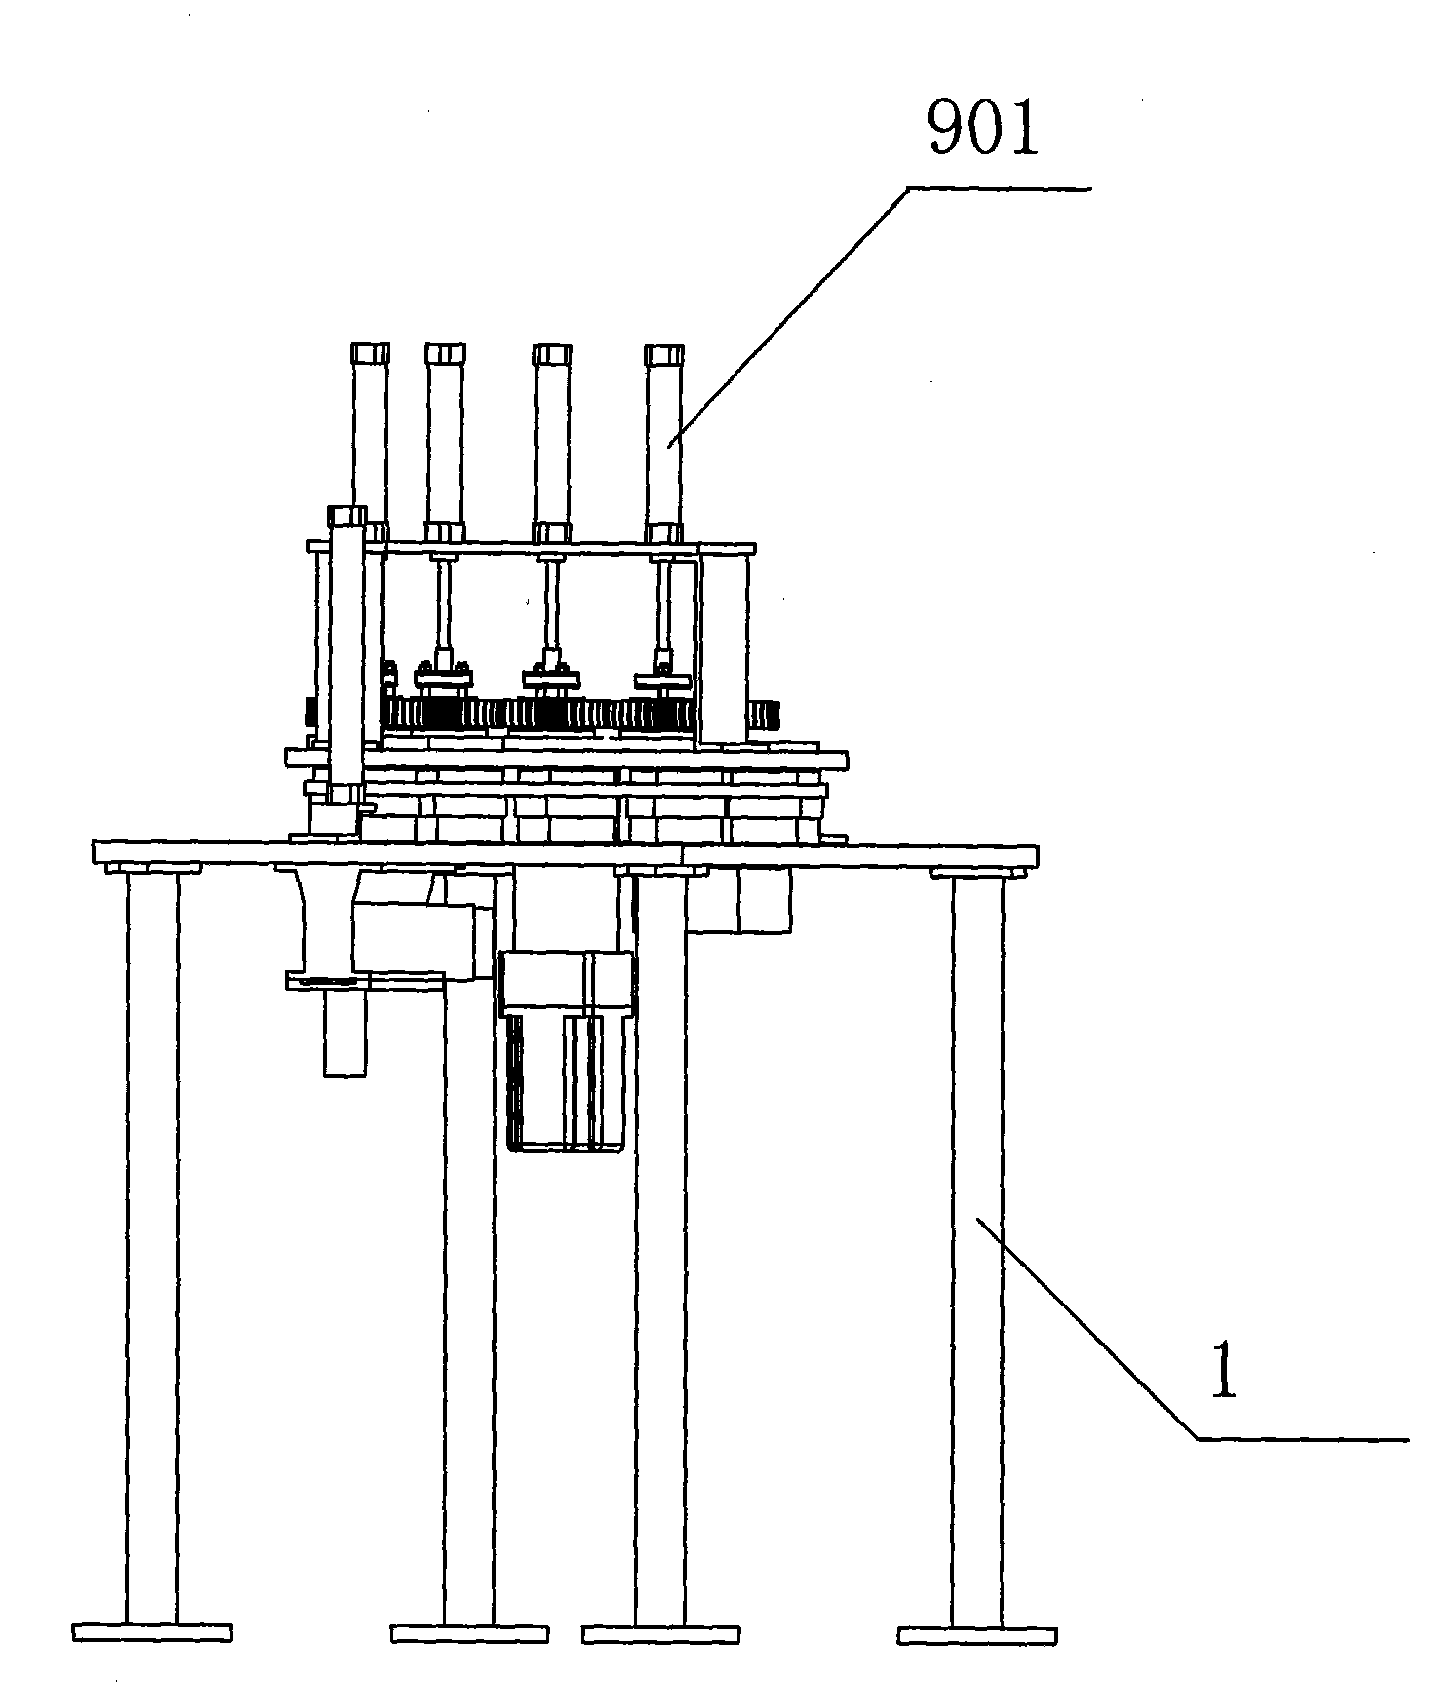 Fish-roe packaging feeding device and method